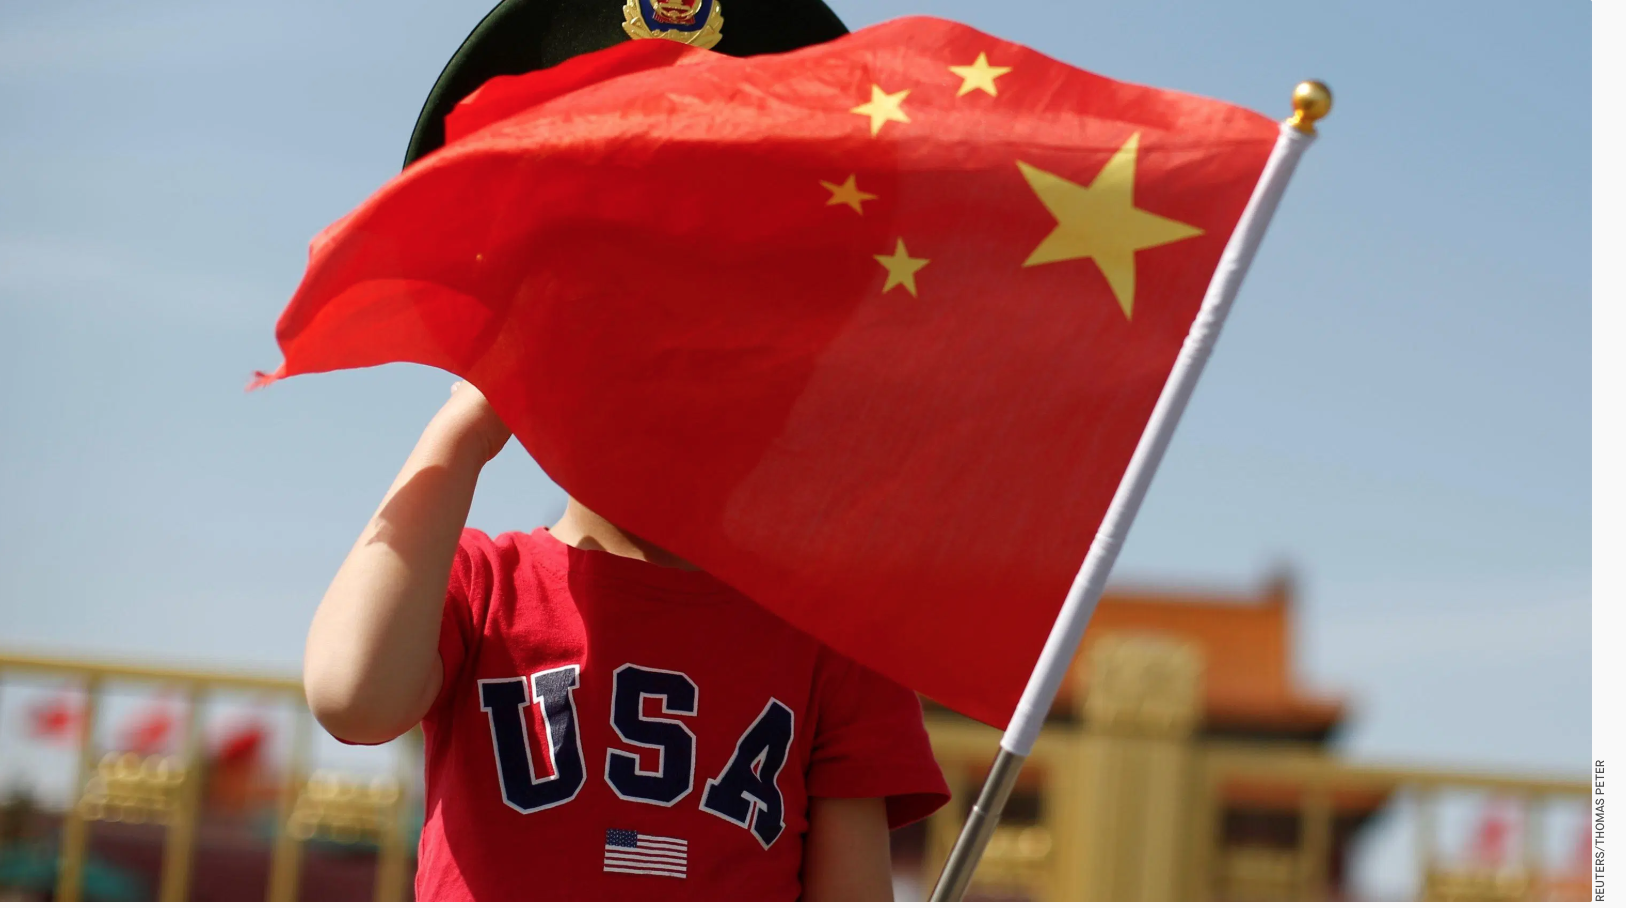 Everyone has moved past the US-China trade war—except the US and China